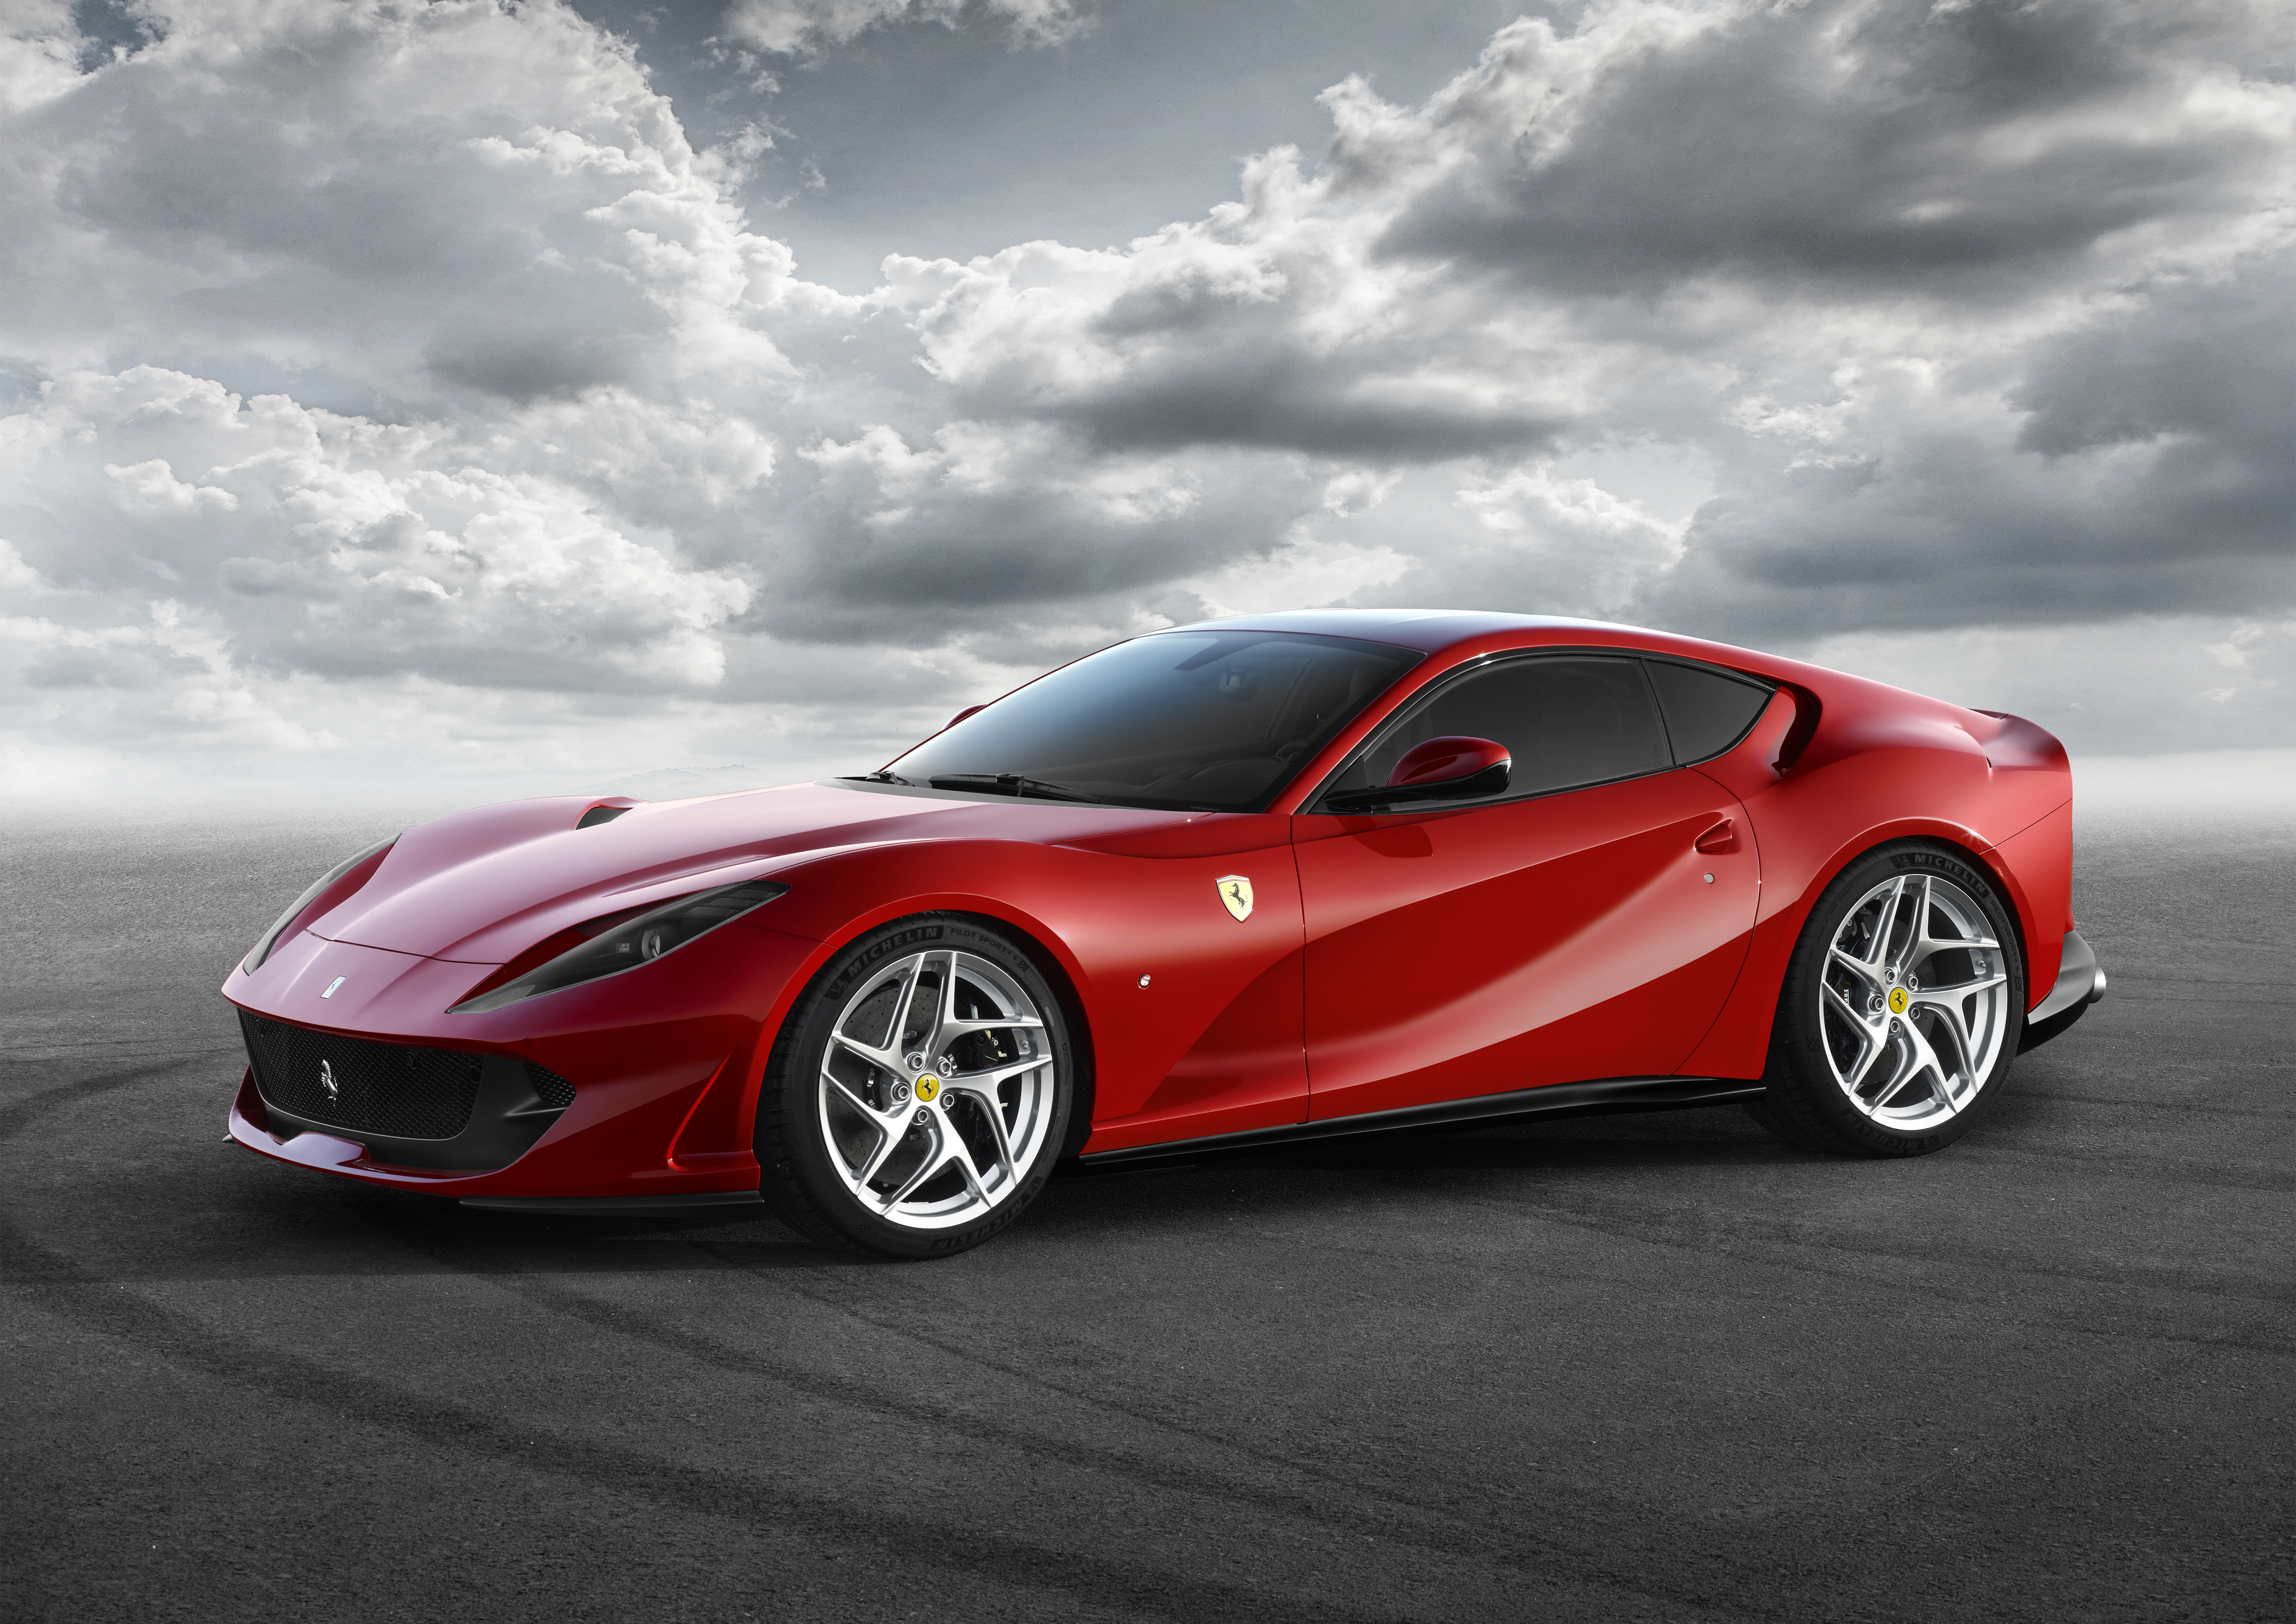 Ferrari’s fastest car yet, a Lotus tribute, and Ford’s big surprise move